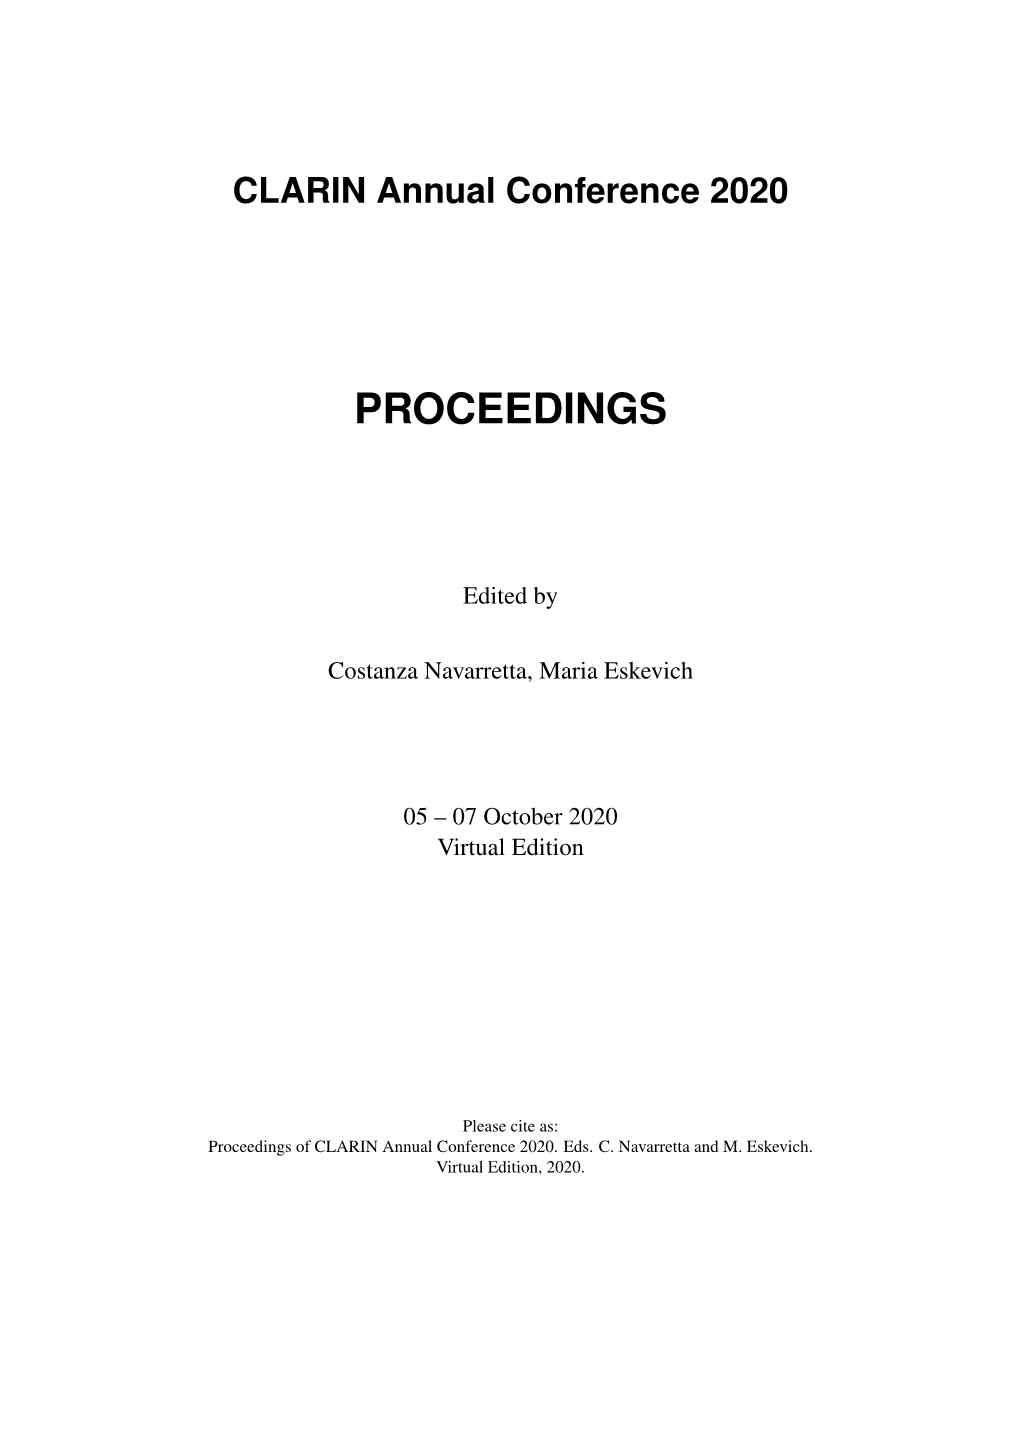 Proceedings of CLARIN Annual Conference 2020